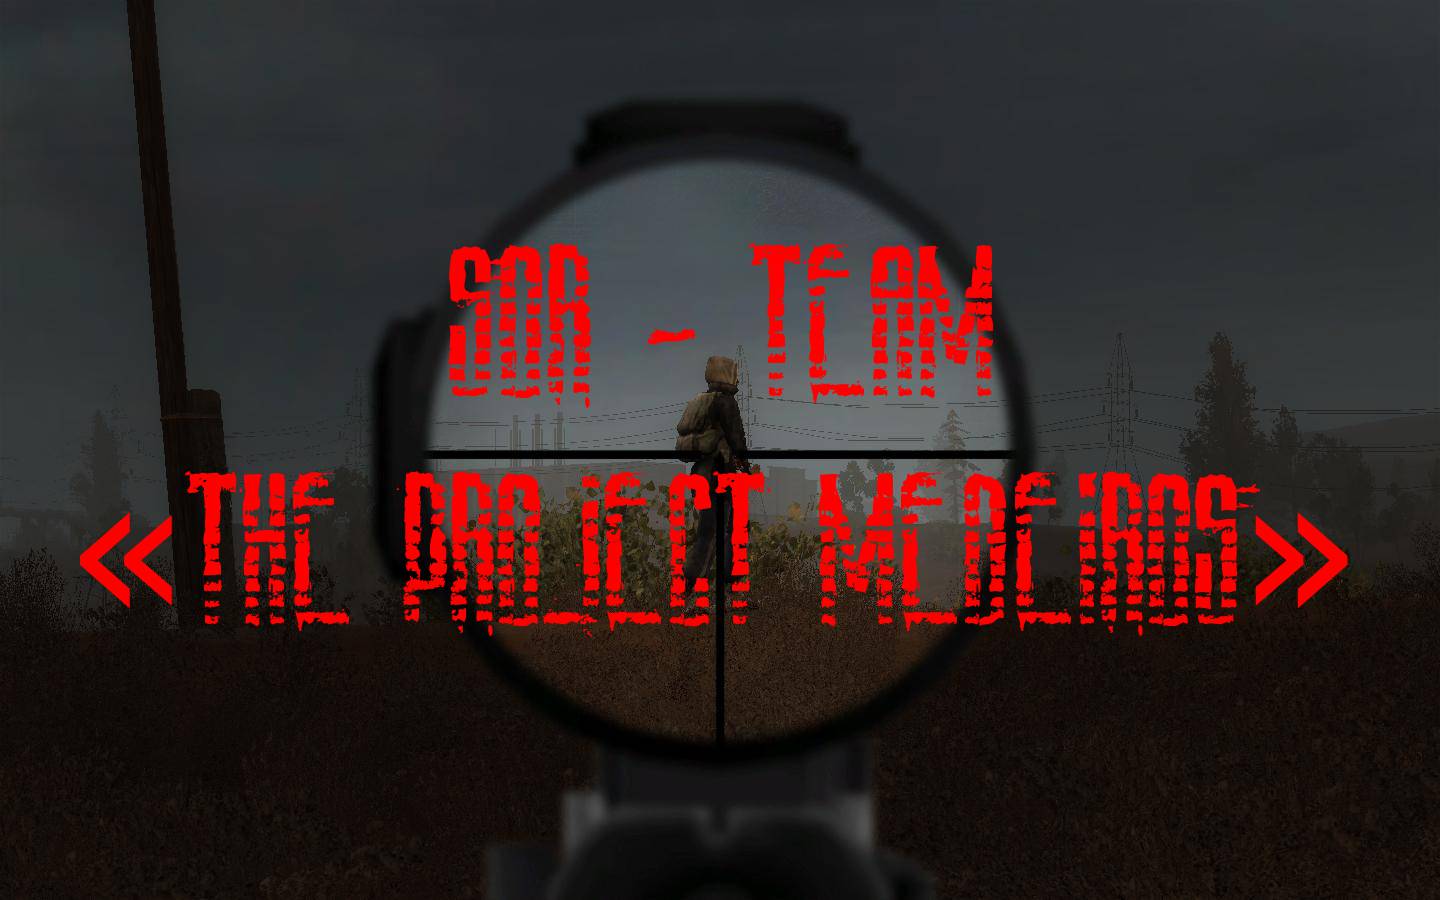 S.T.A.L.K.E.R. Call of Pripyat - The Project Medeiros